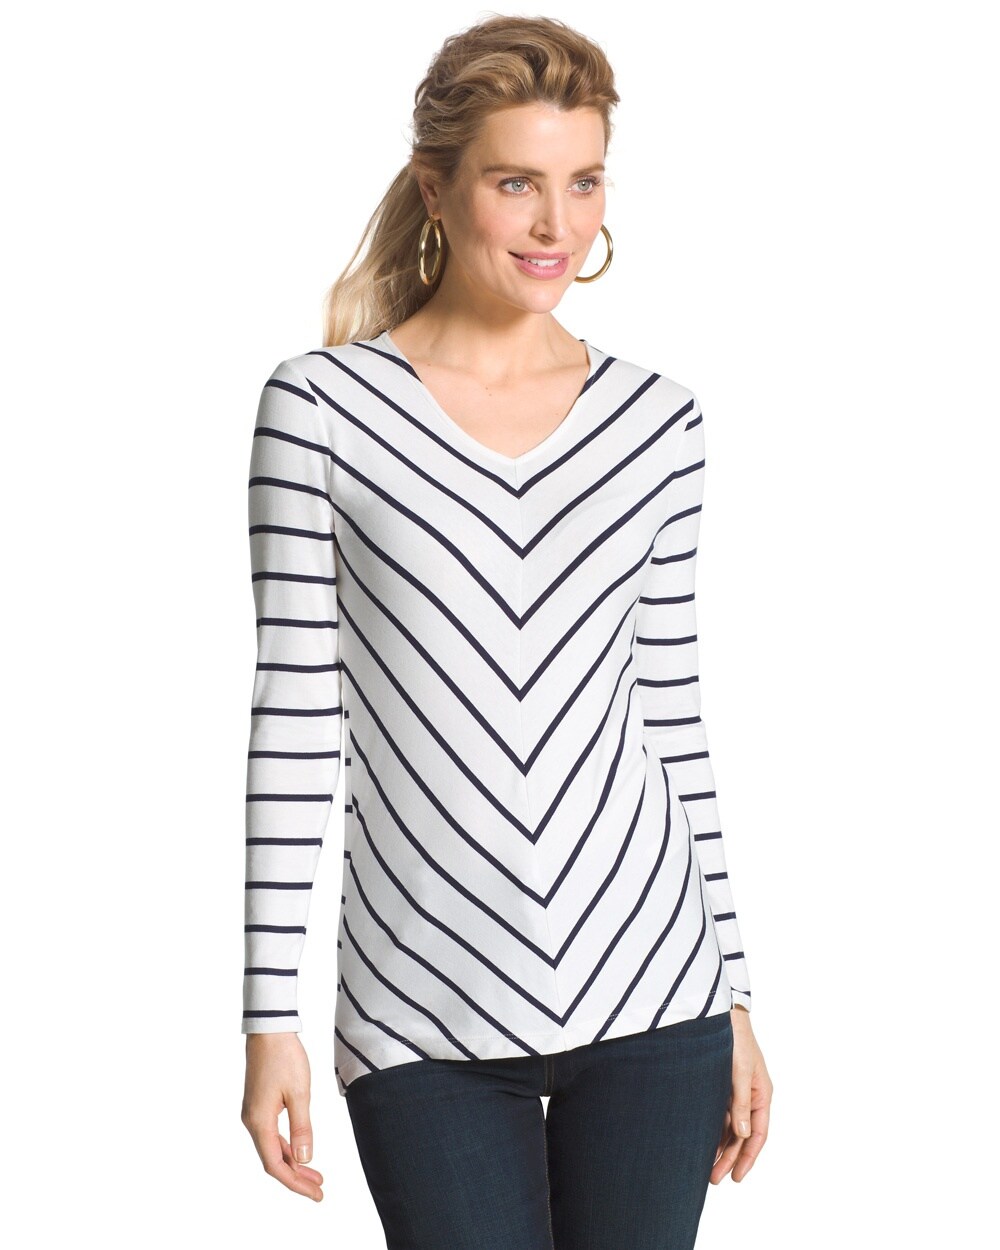 Mitered Stripe Valarie Top - Women's New Clothing - Tops, Bottoms ...